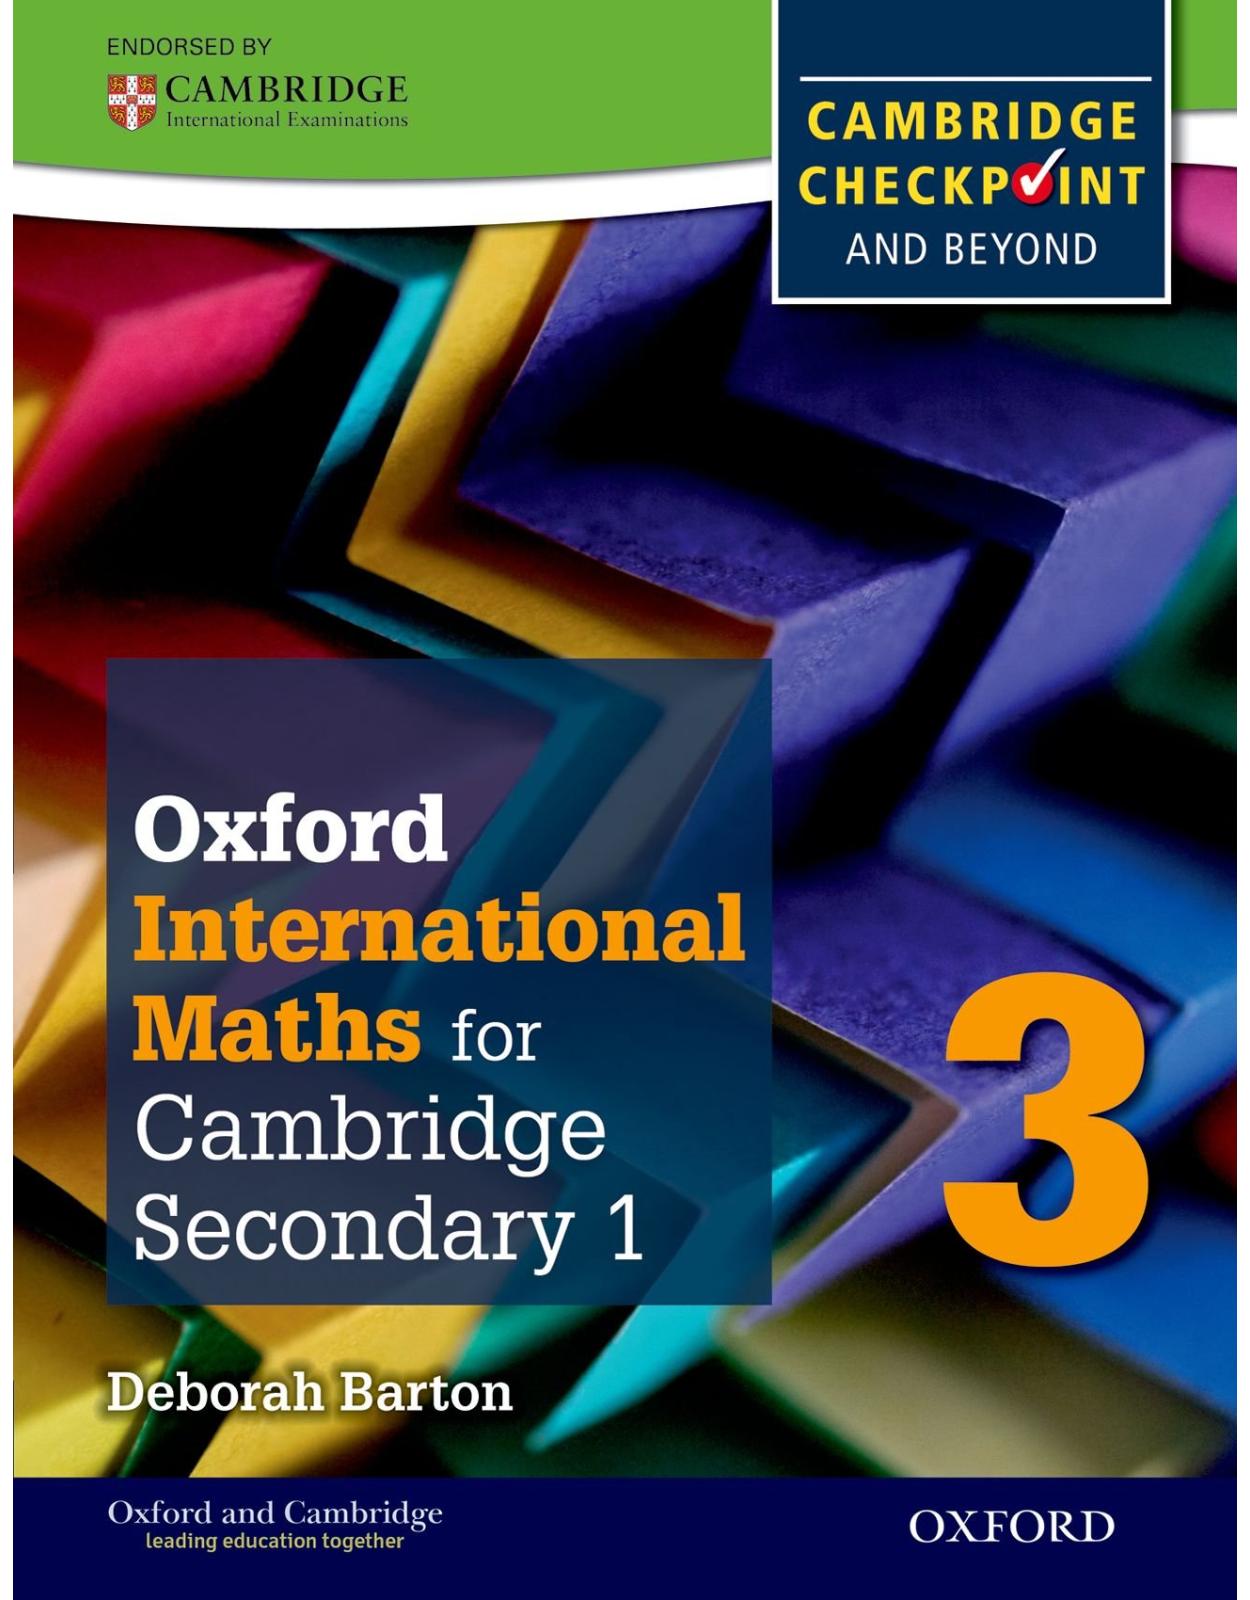 Complete Mathematics for Cambridge Secondary 1 Student Book 3: For Cambridge Checkpoint and beyond